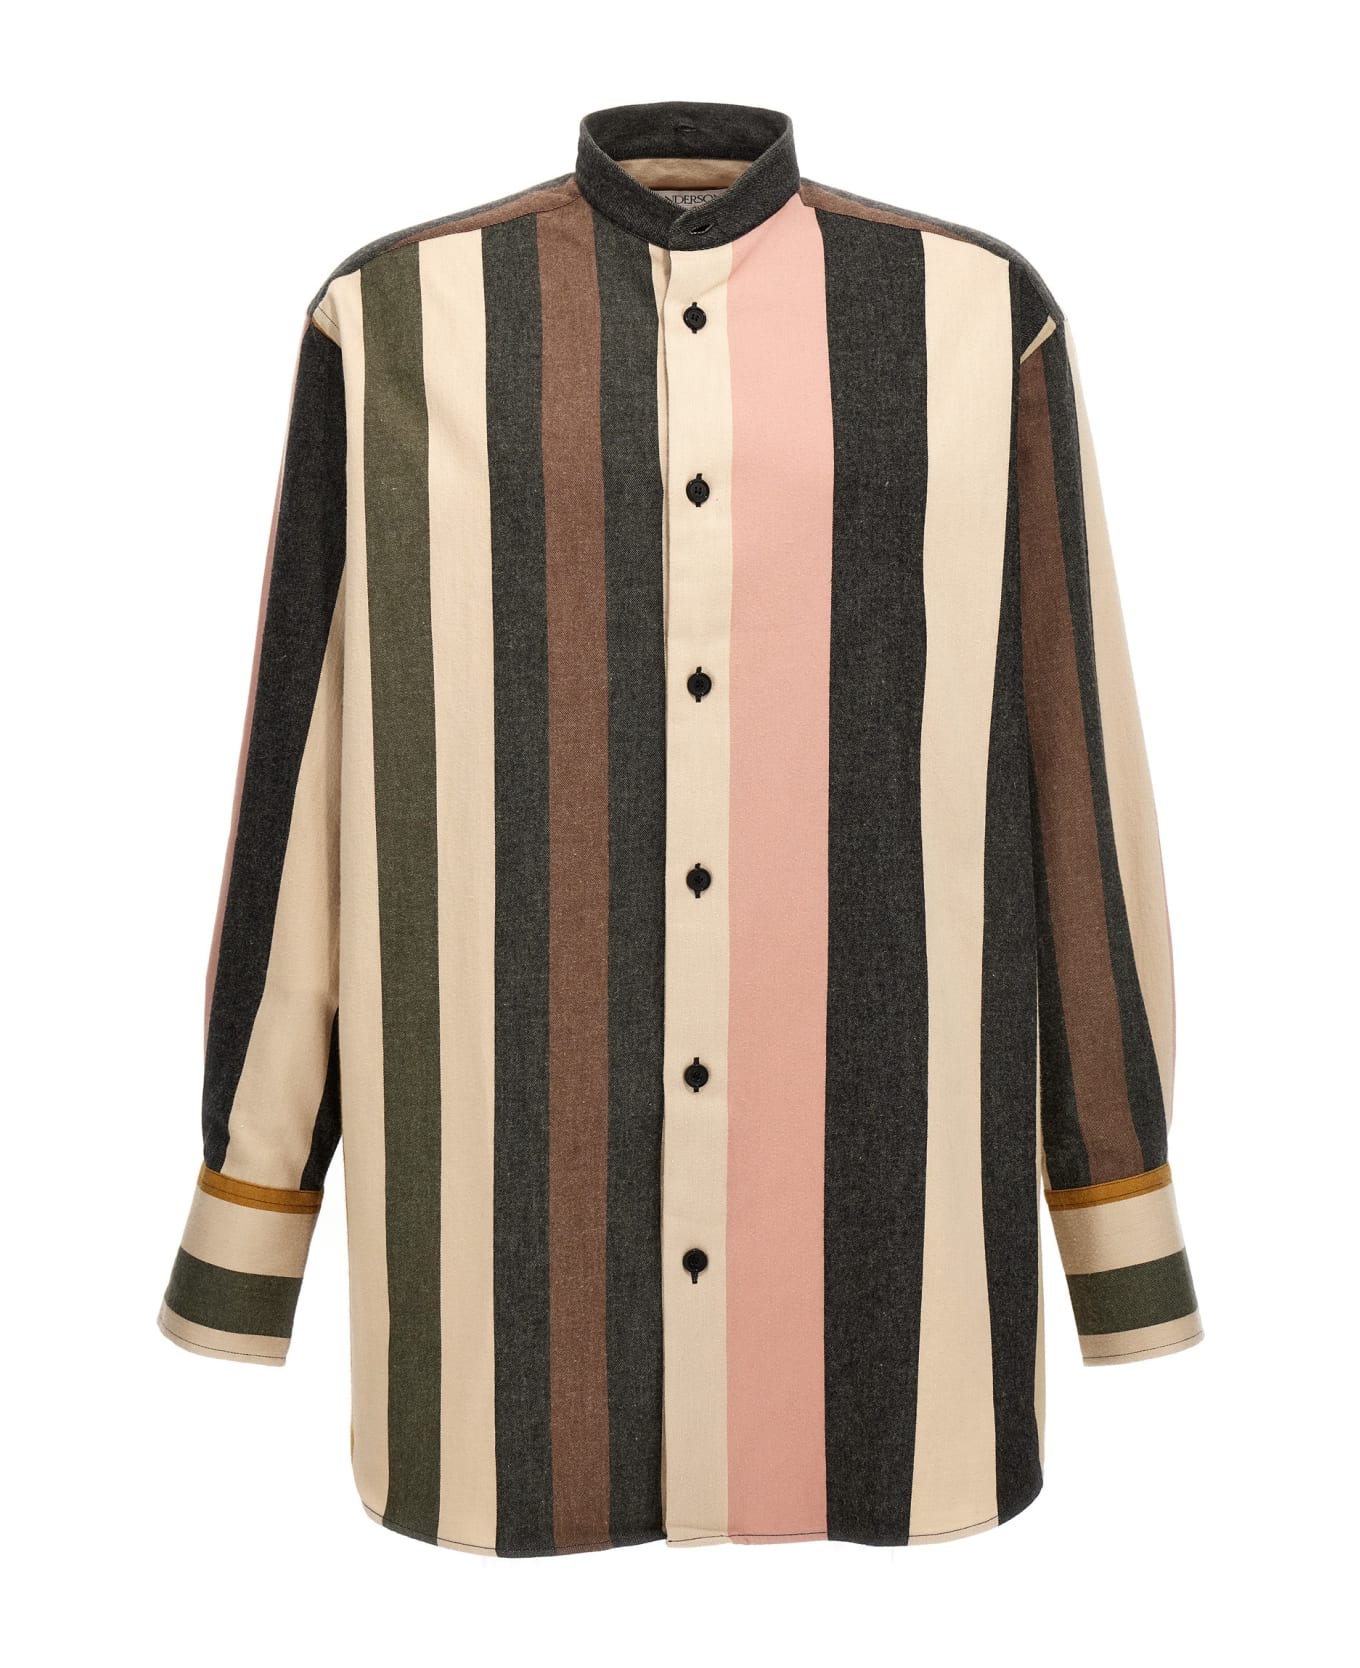 J.W. Anderson Logo Embroidered Striped Shirt - Multicolor